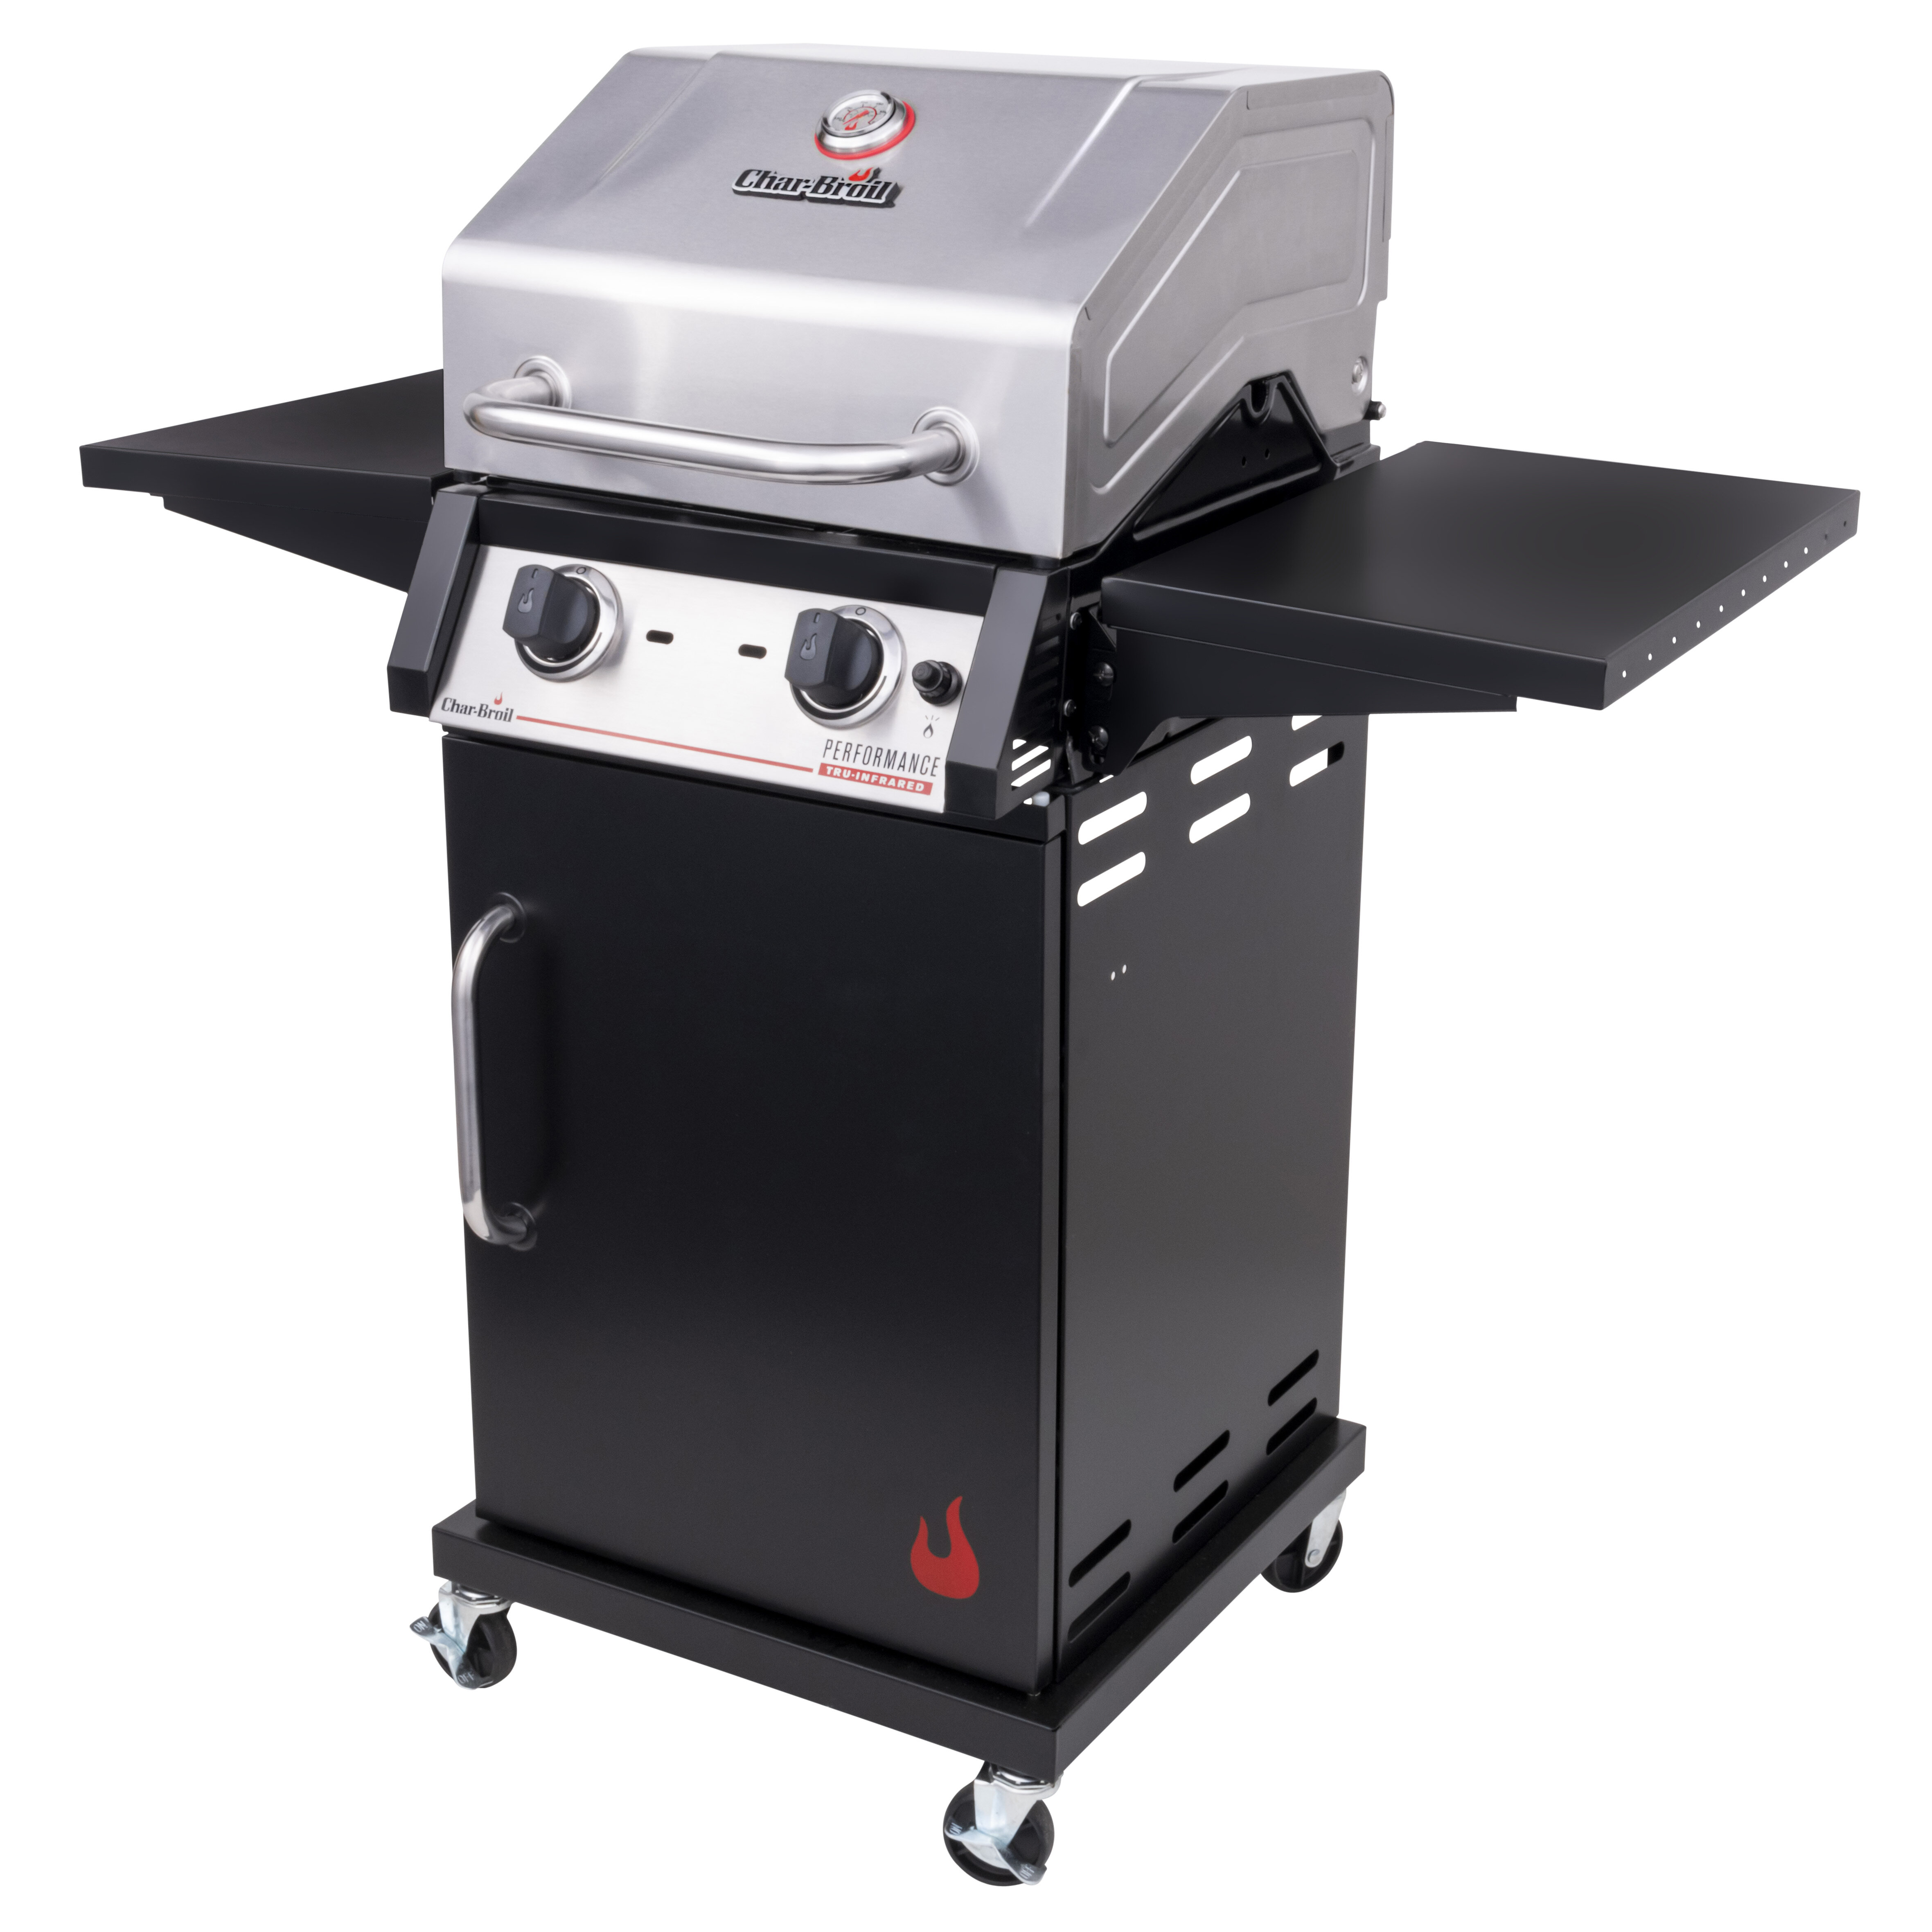 Char-Broil Performance Stainless Steel TRU-Infrared 2-Burner Gas Grill Silver for sale online 